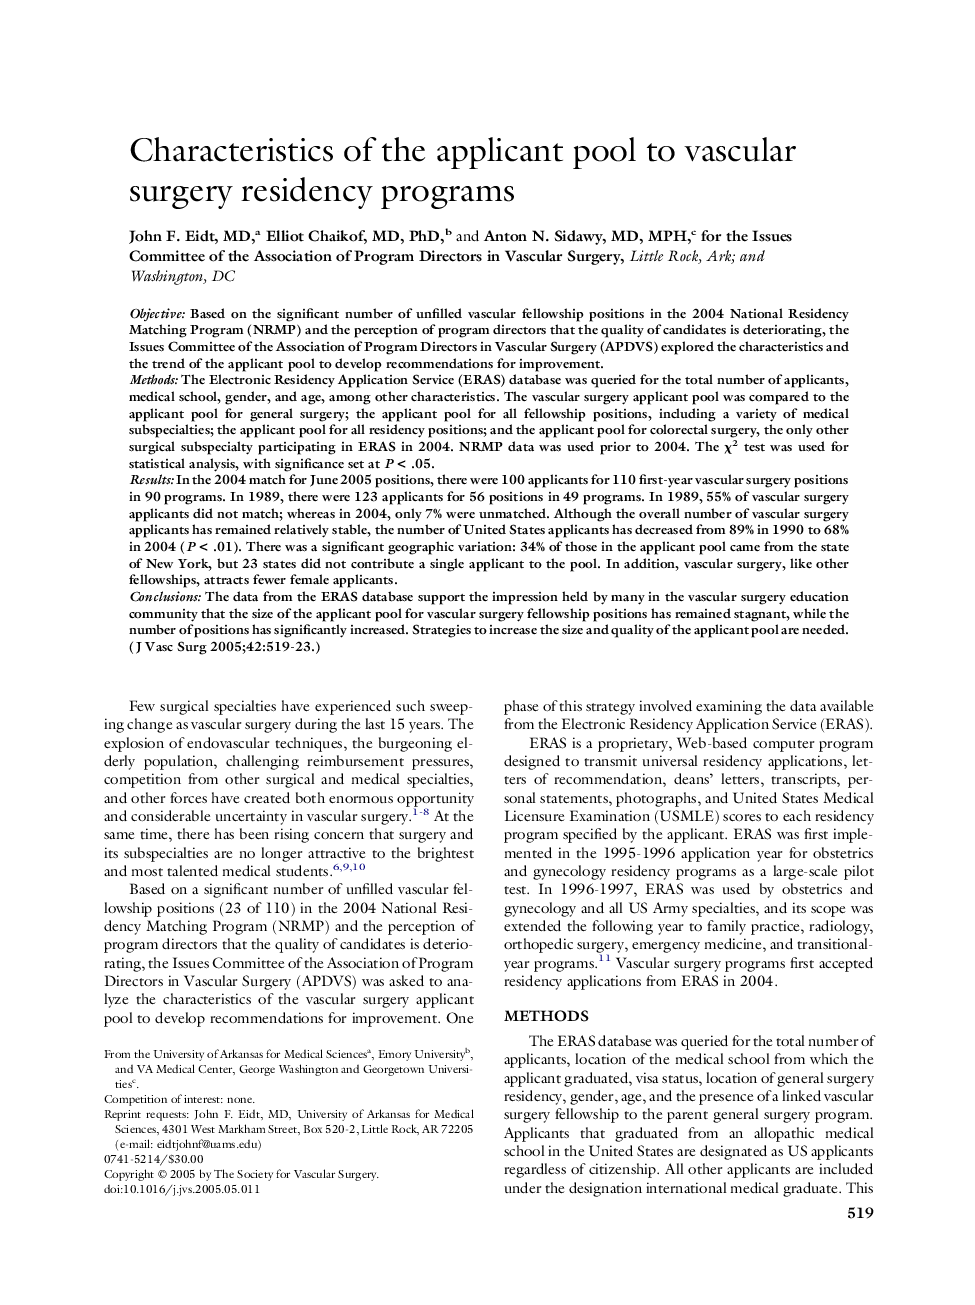 Characteristics of the applicant pool to vascular surgery residency programs